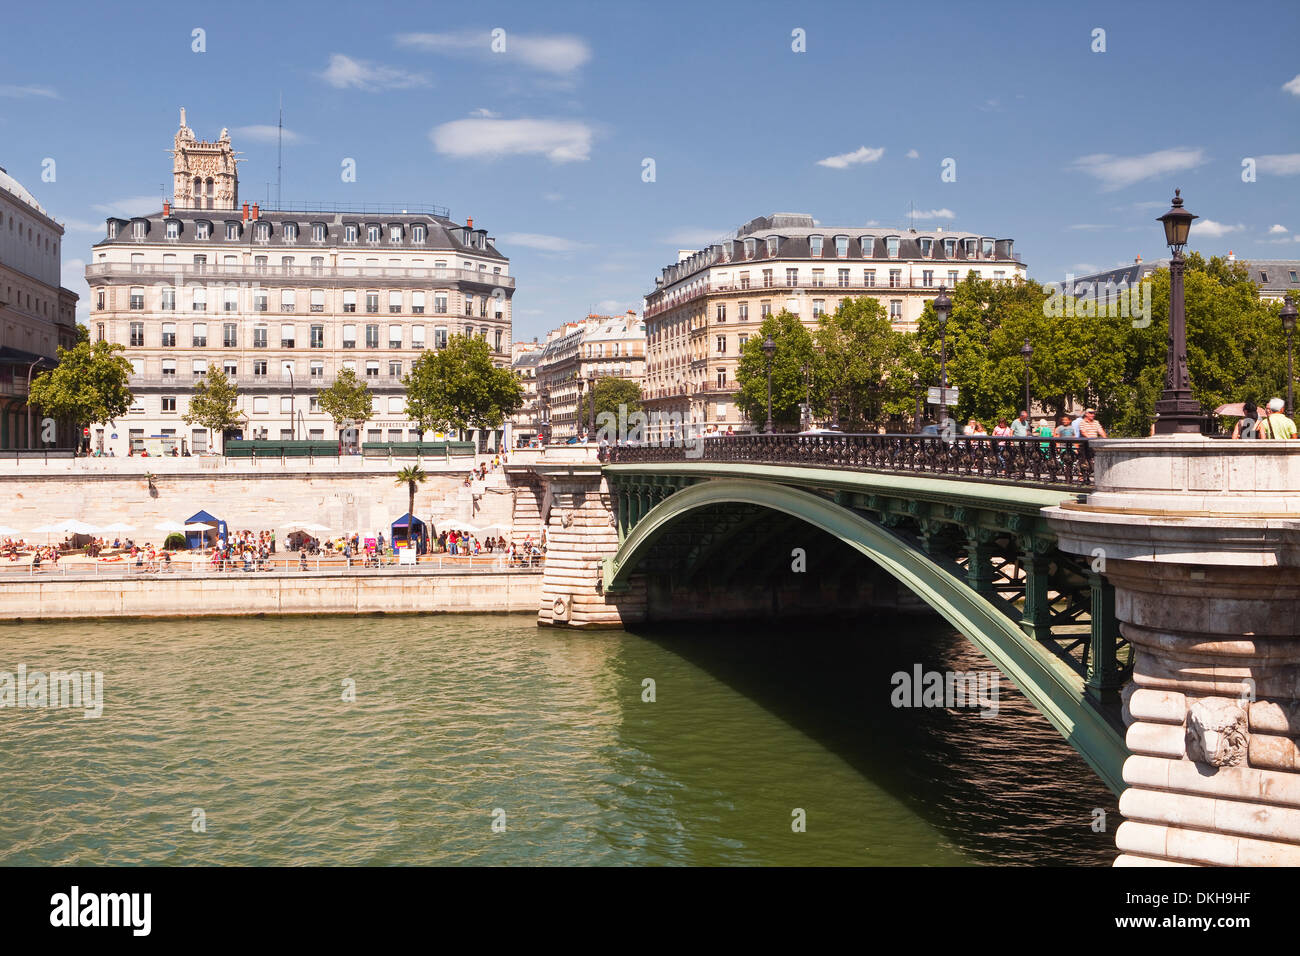 Pont d'Arcole with the annual Paris Plage on the banks of the River Seine, Paris, France, Europe Stock Photo